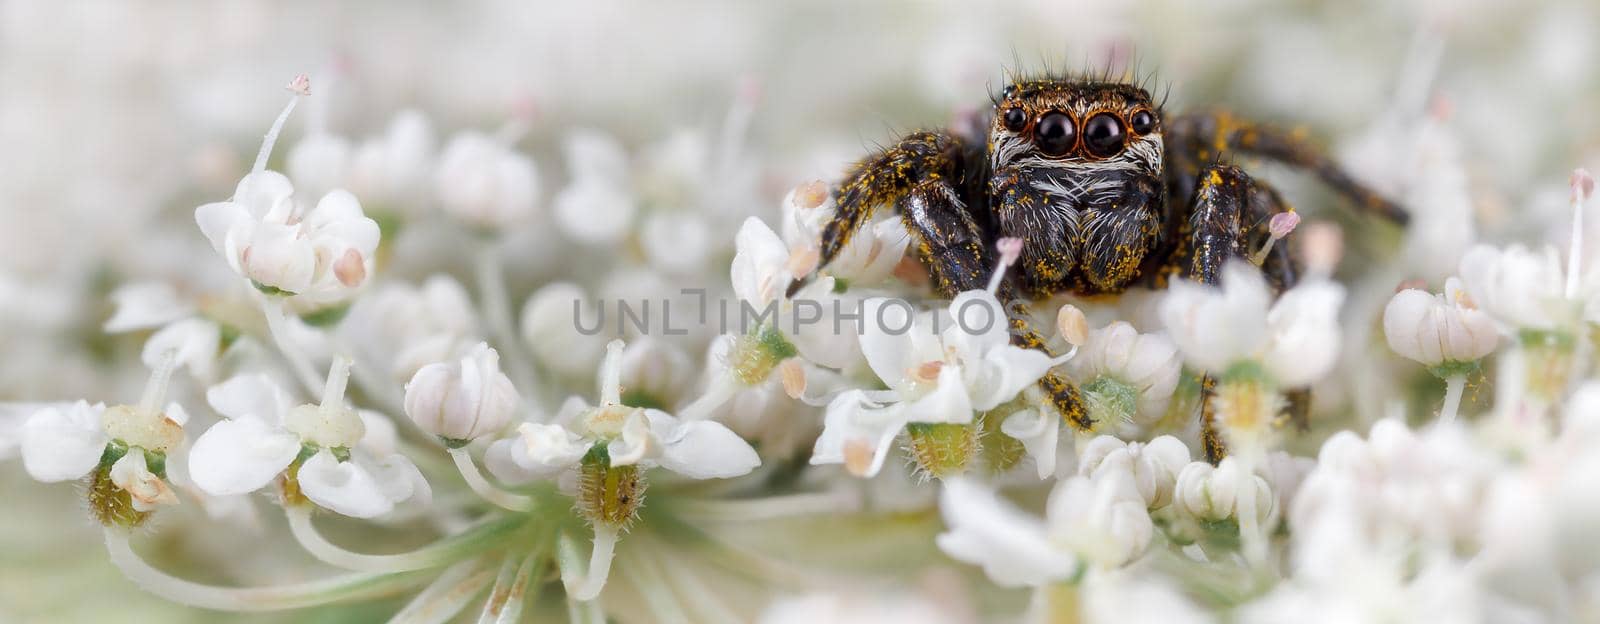 Jumping spider on the nice white wedding flowers by Lincikas